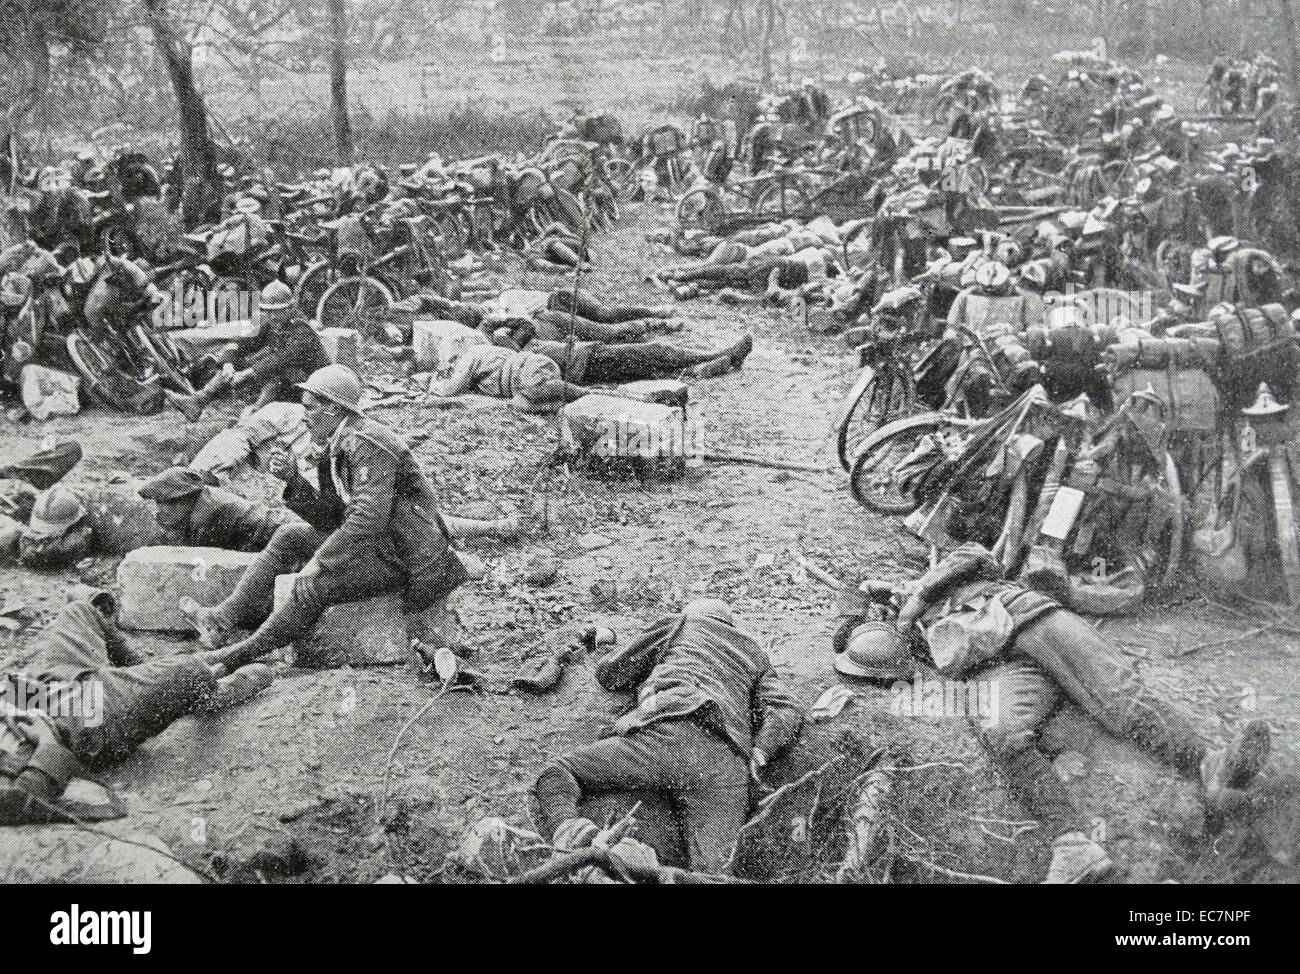 Exhausted French soldiers rest during a lull in the battle of the marne, France, 1914. World war one Stock Photo